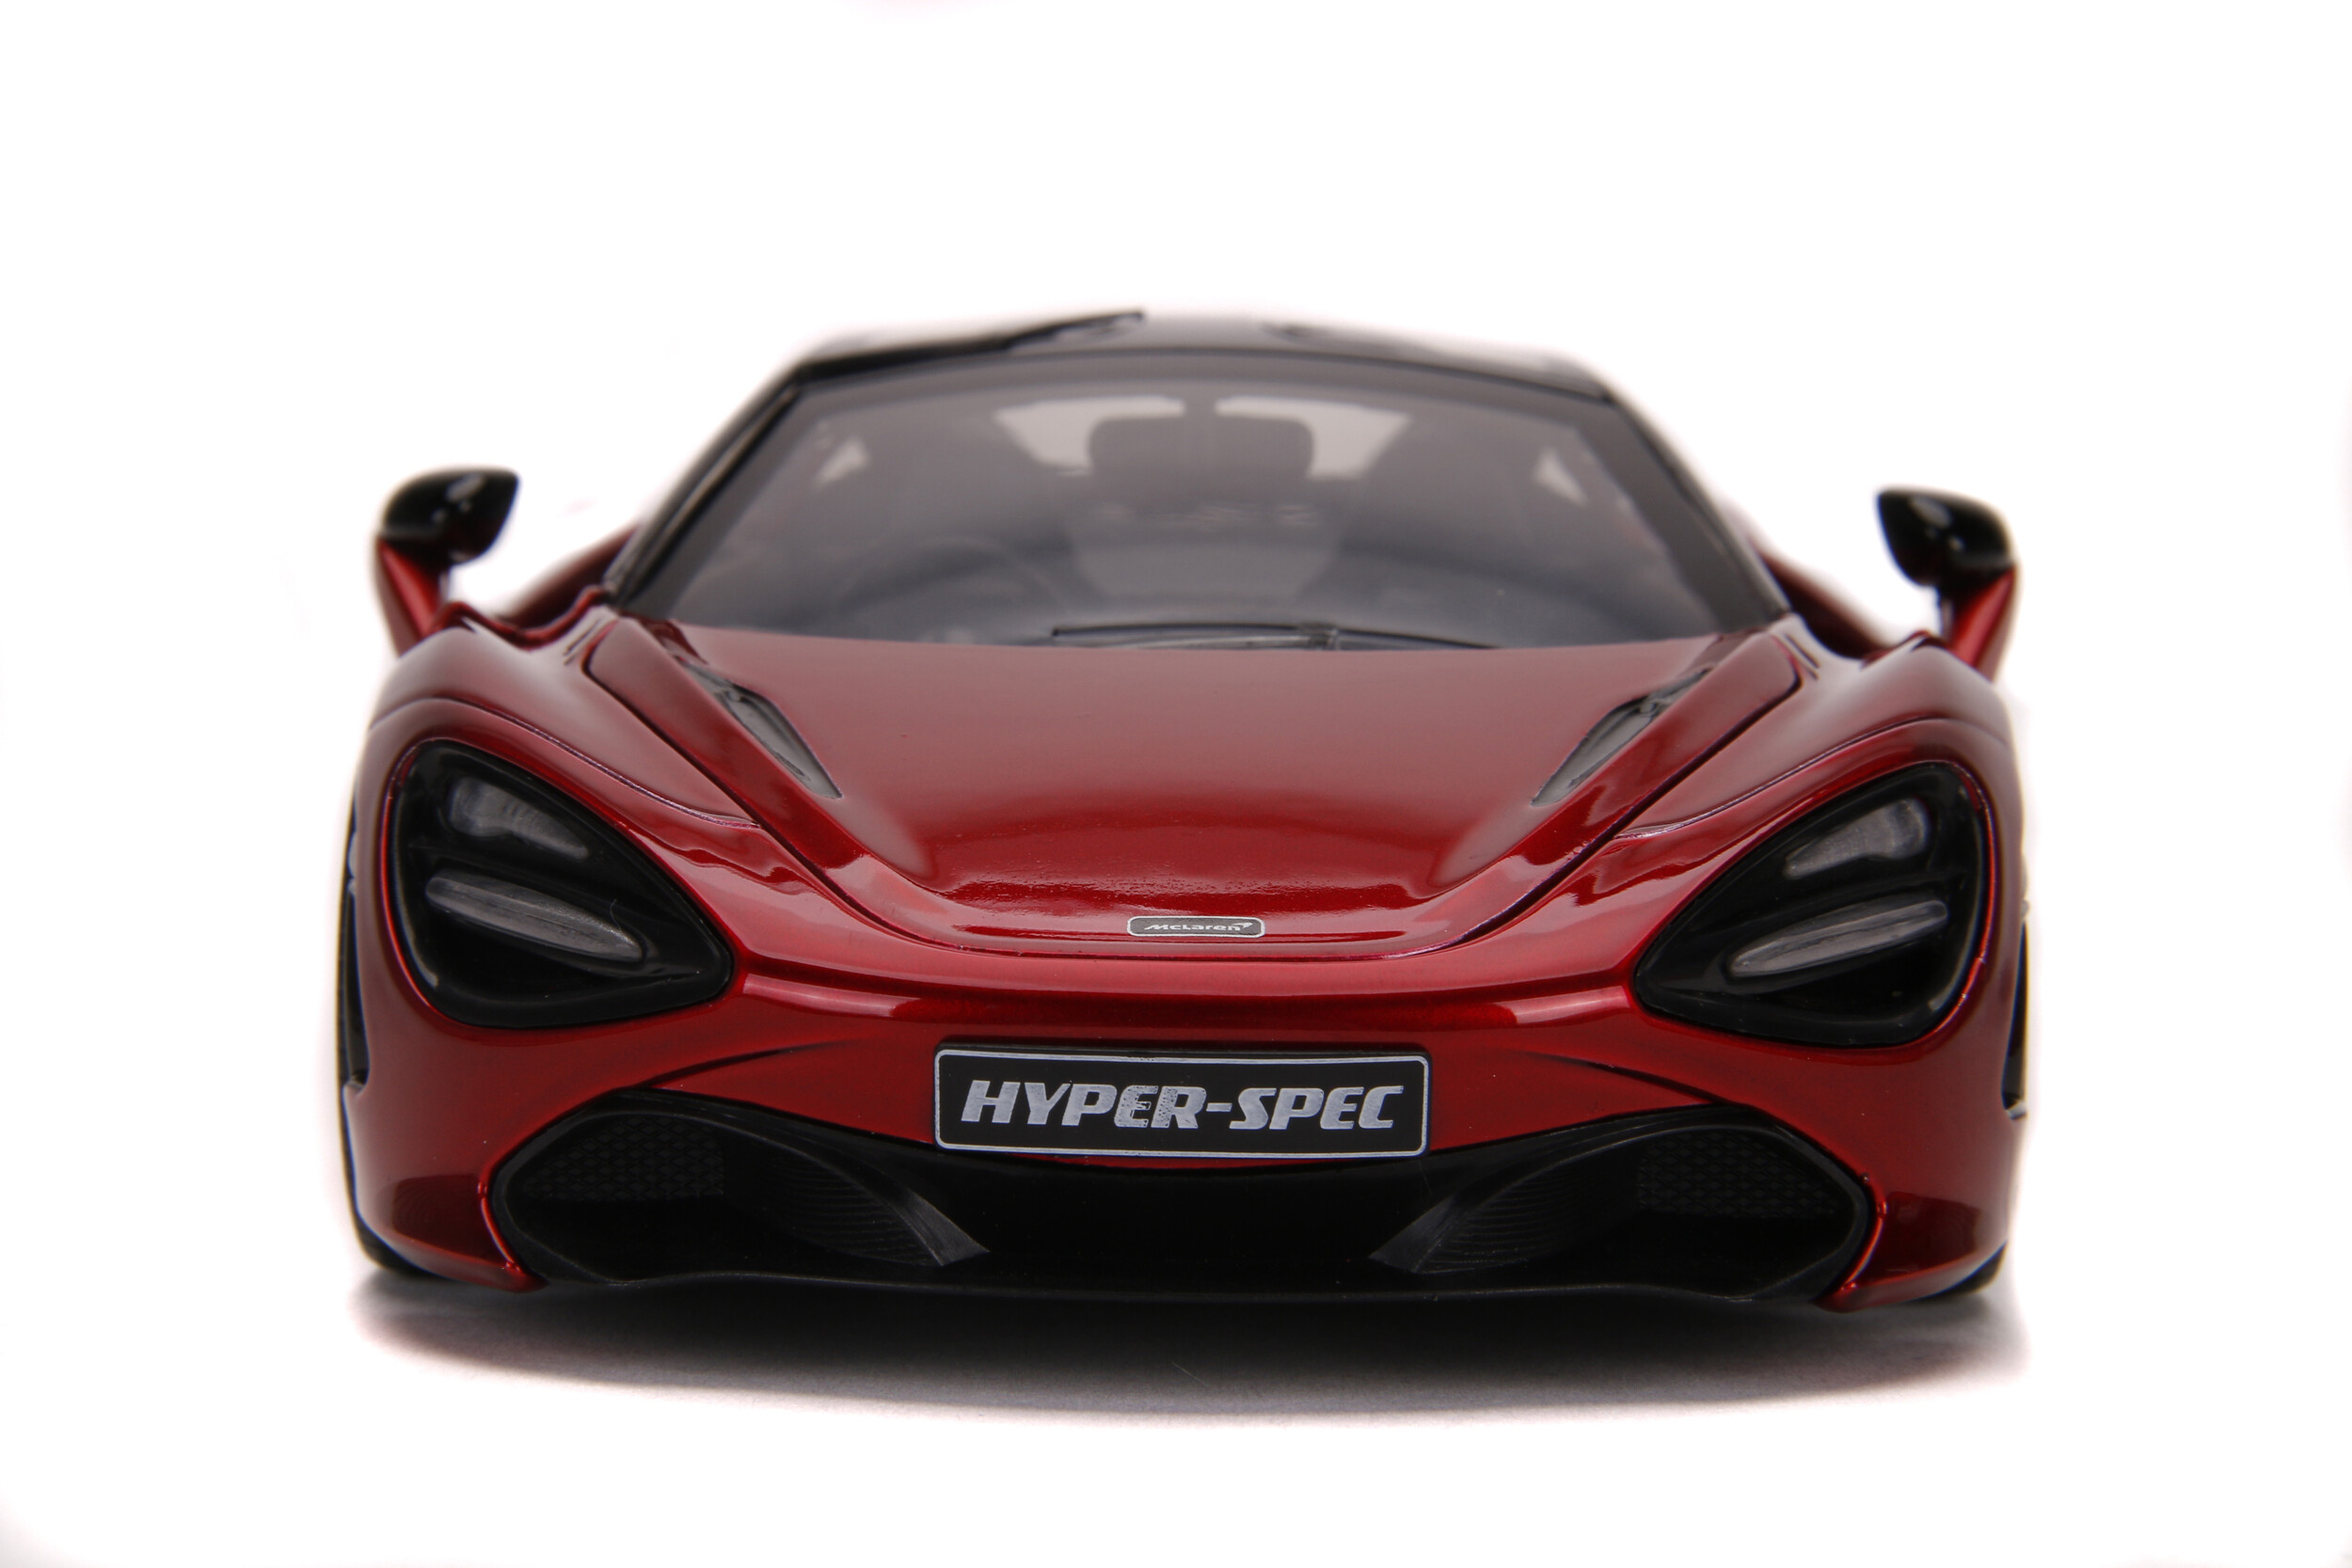 McLaren 720S, Candy Red and Black - Jada Toys 32275/4 - 1/24 scale